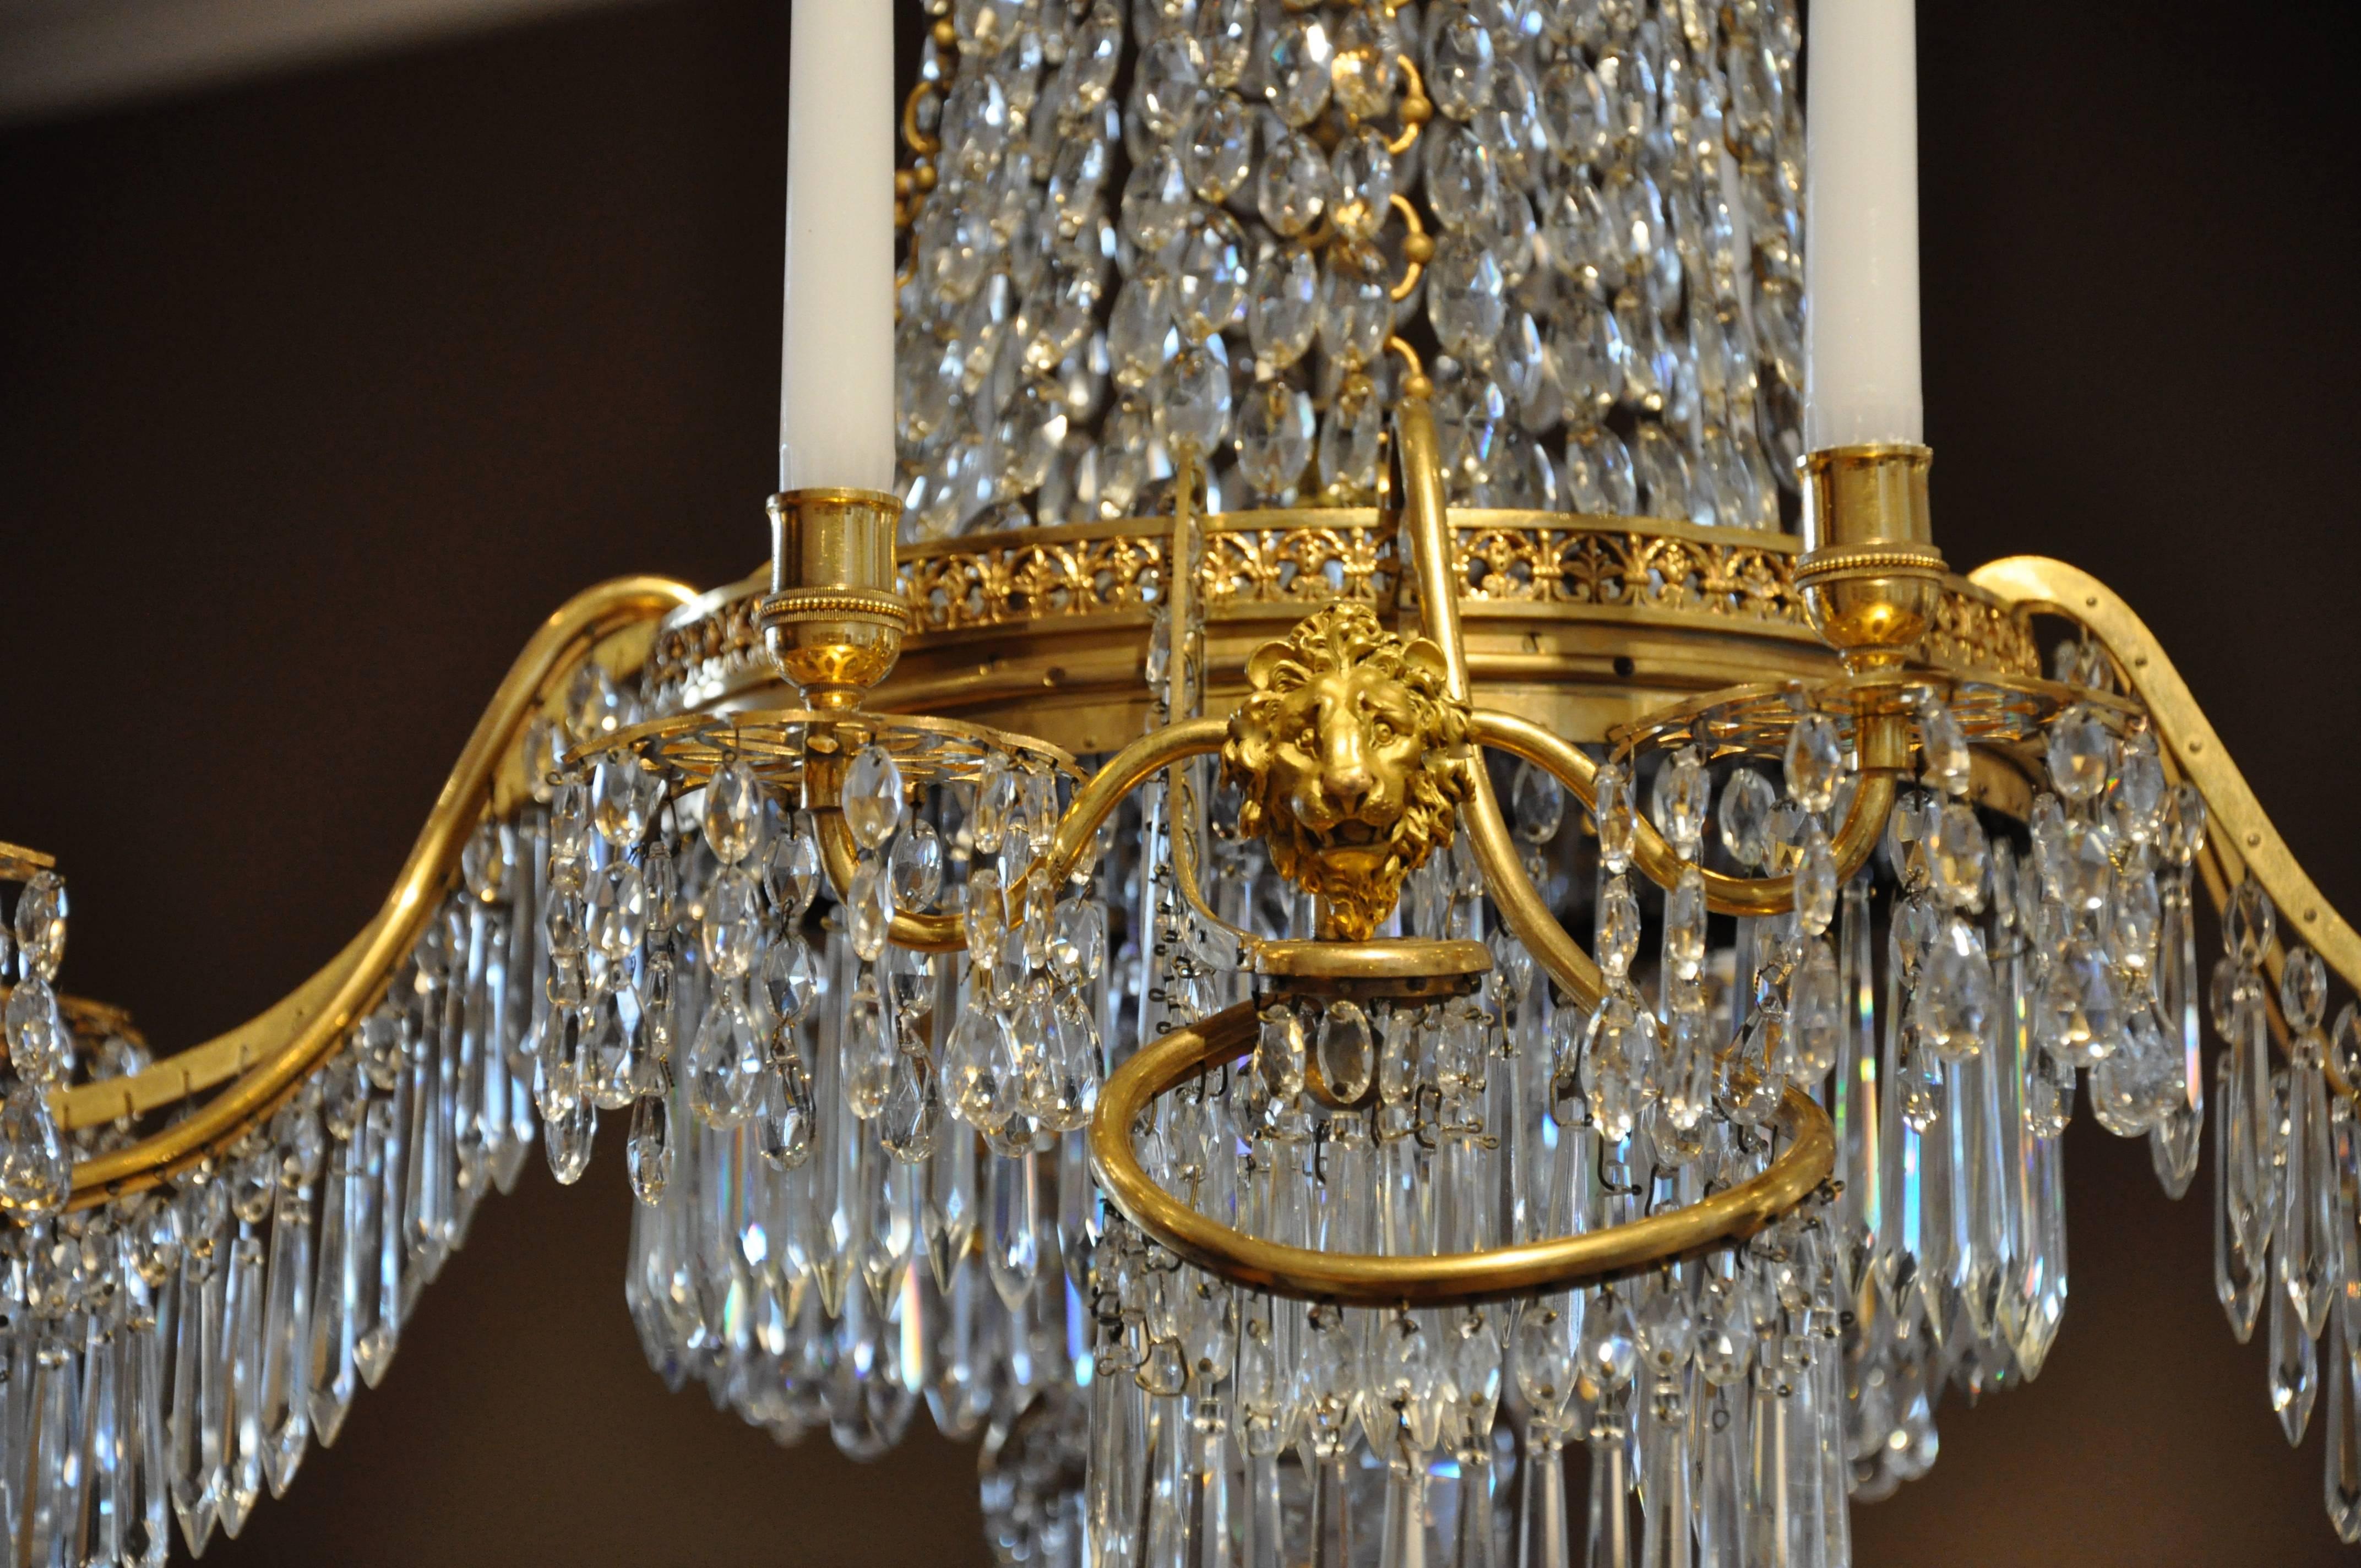 Period German neoclassical chandelier in gilt bonze with original crystals and cobalt glass plate.  Manufacturer Werner and Mieth, Berlin

--Perfect Ormolu, all original.
--issuing eight candle arms
--never has been drilled for